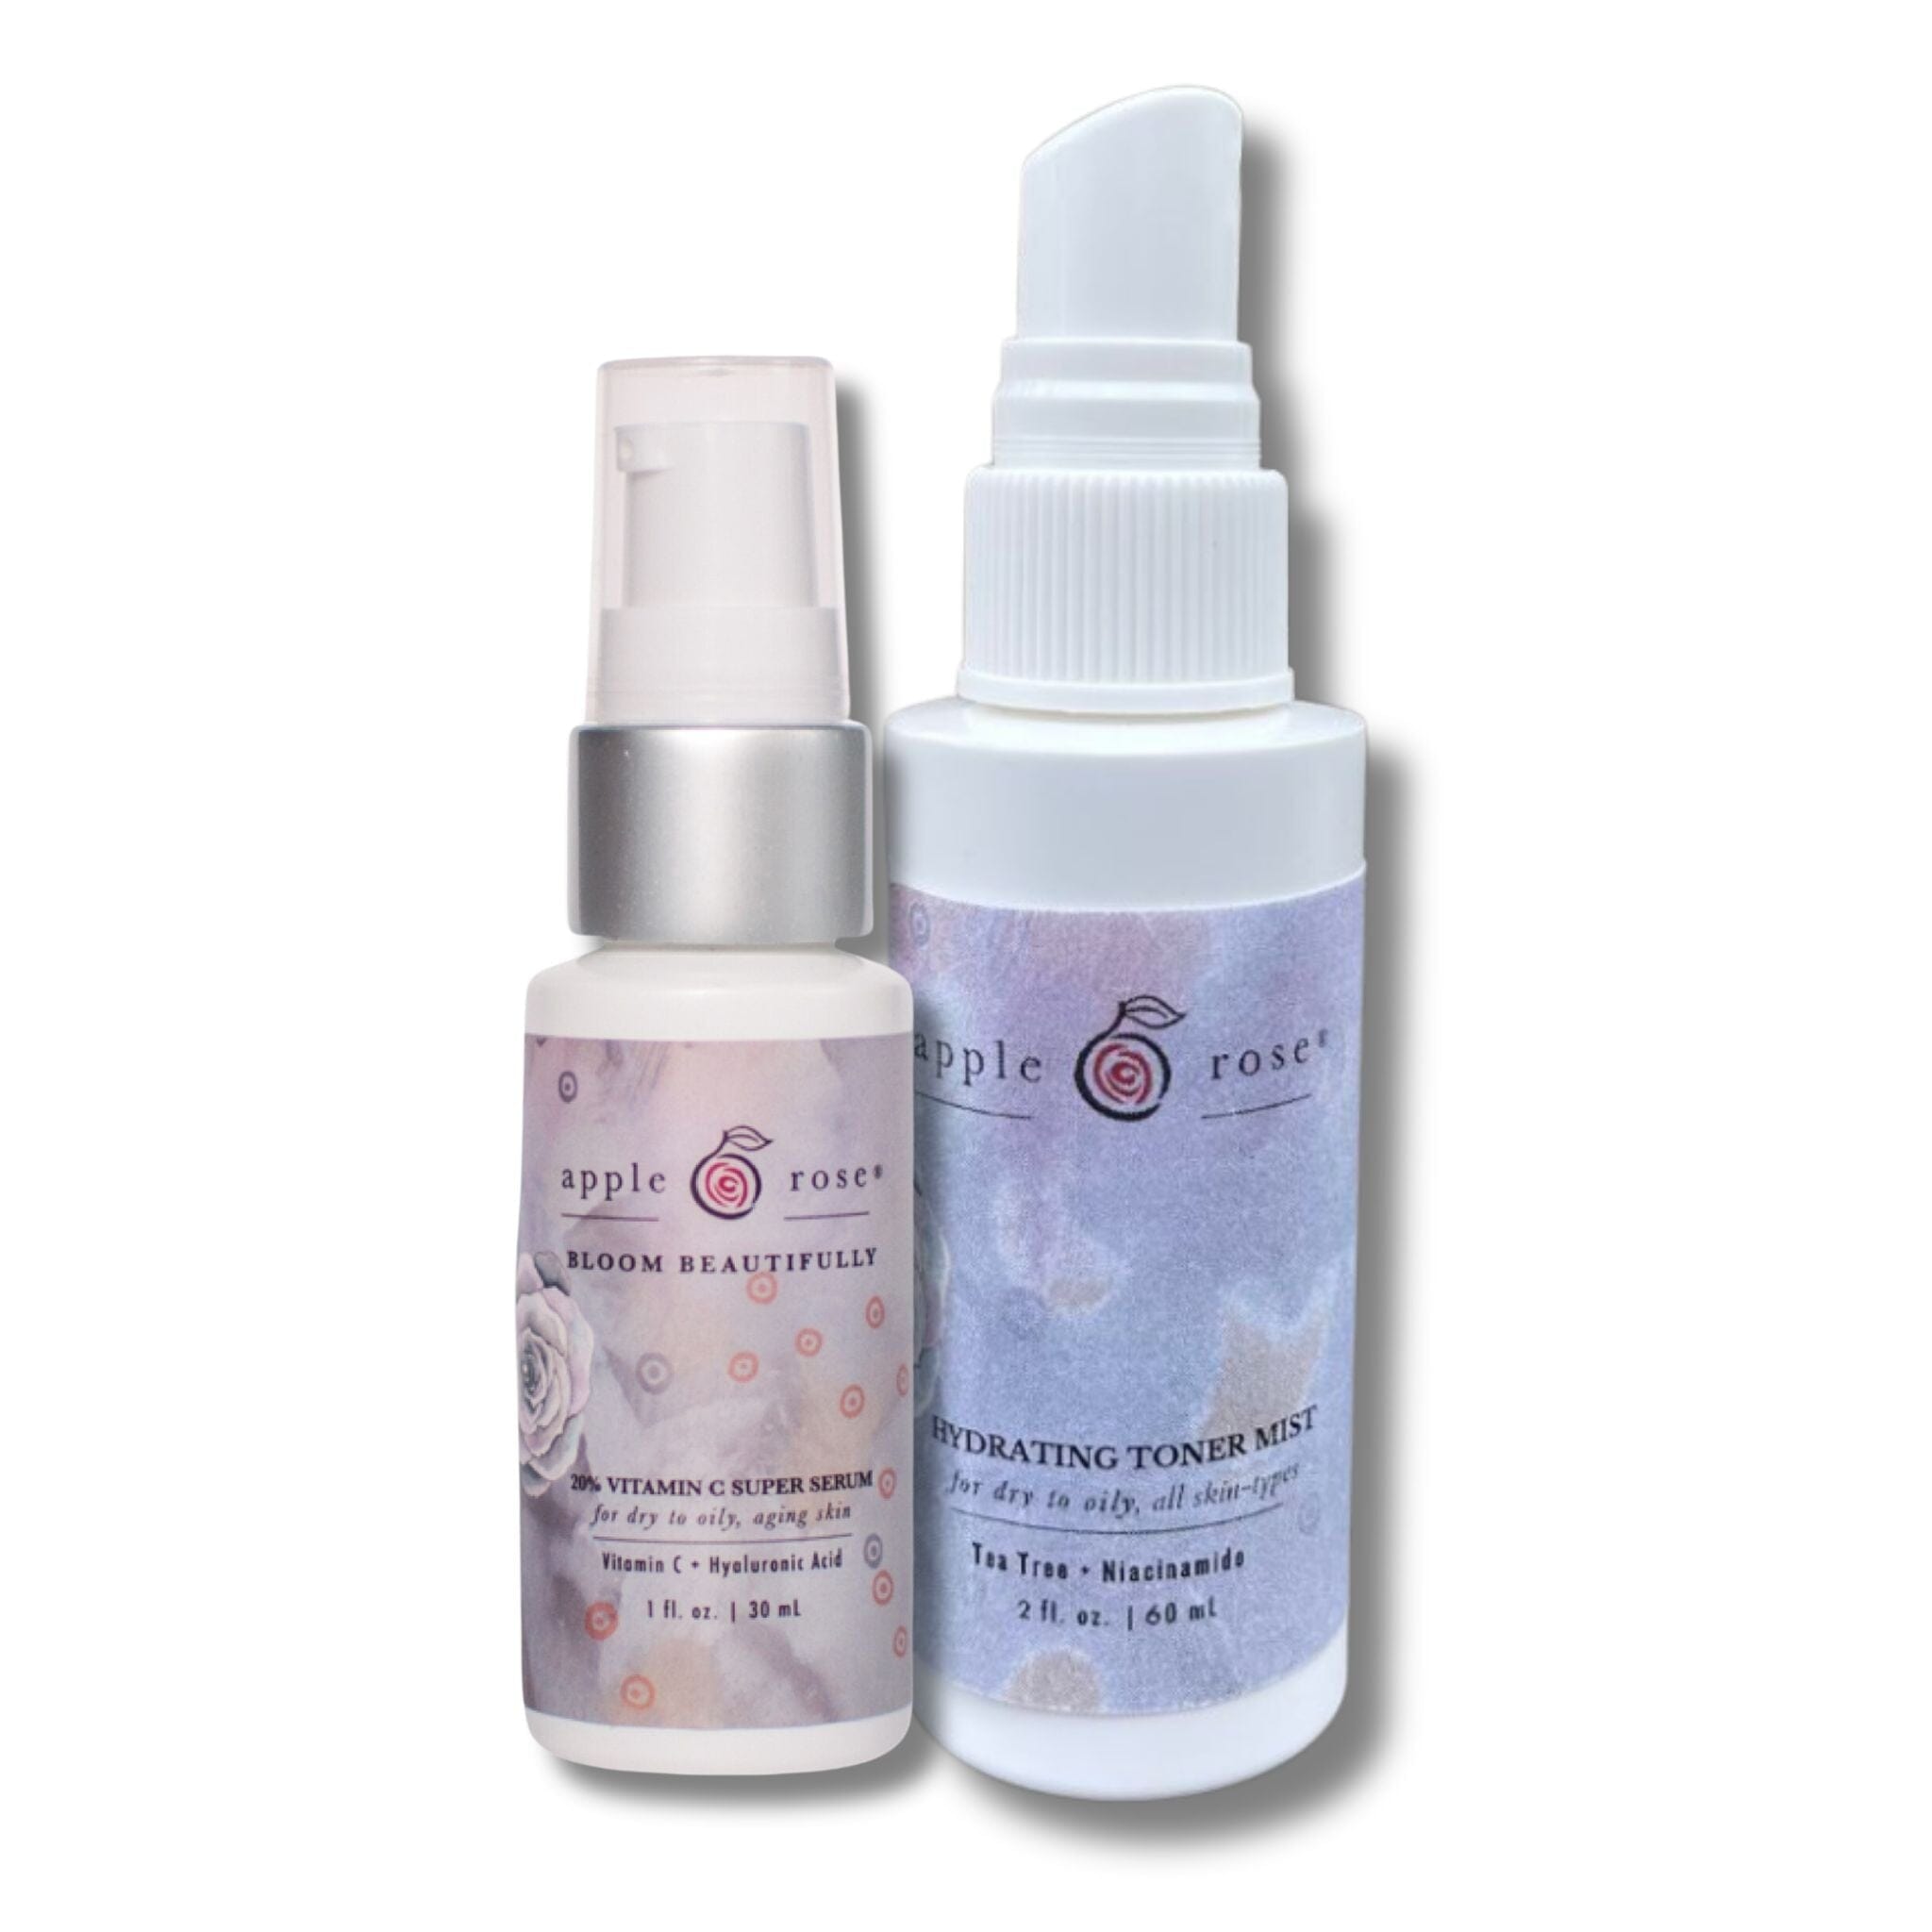 Daytime Hydration Bundle from Apple Rose Beauty natural and organic skin care and organic beauty